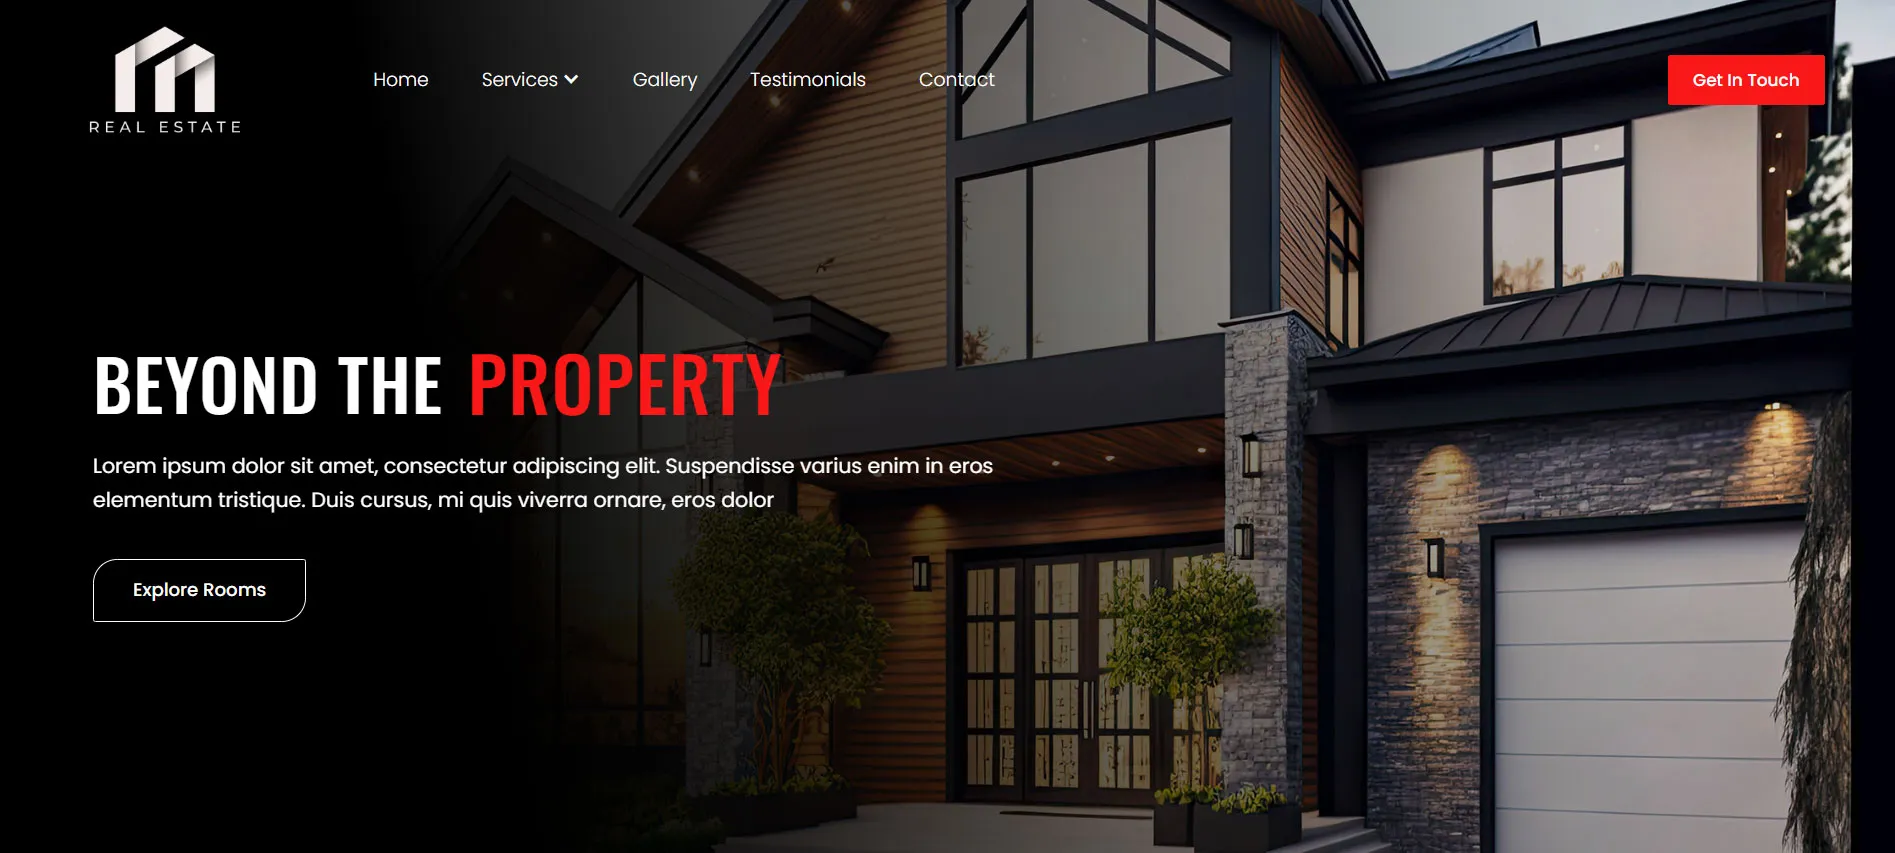 Beyond The Property Website Theme